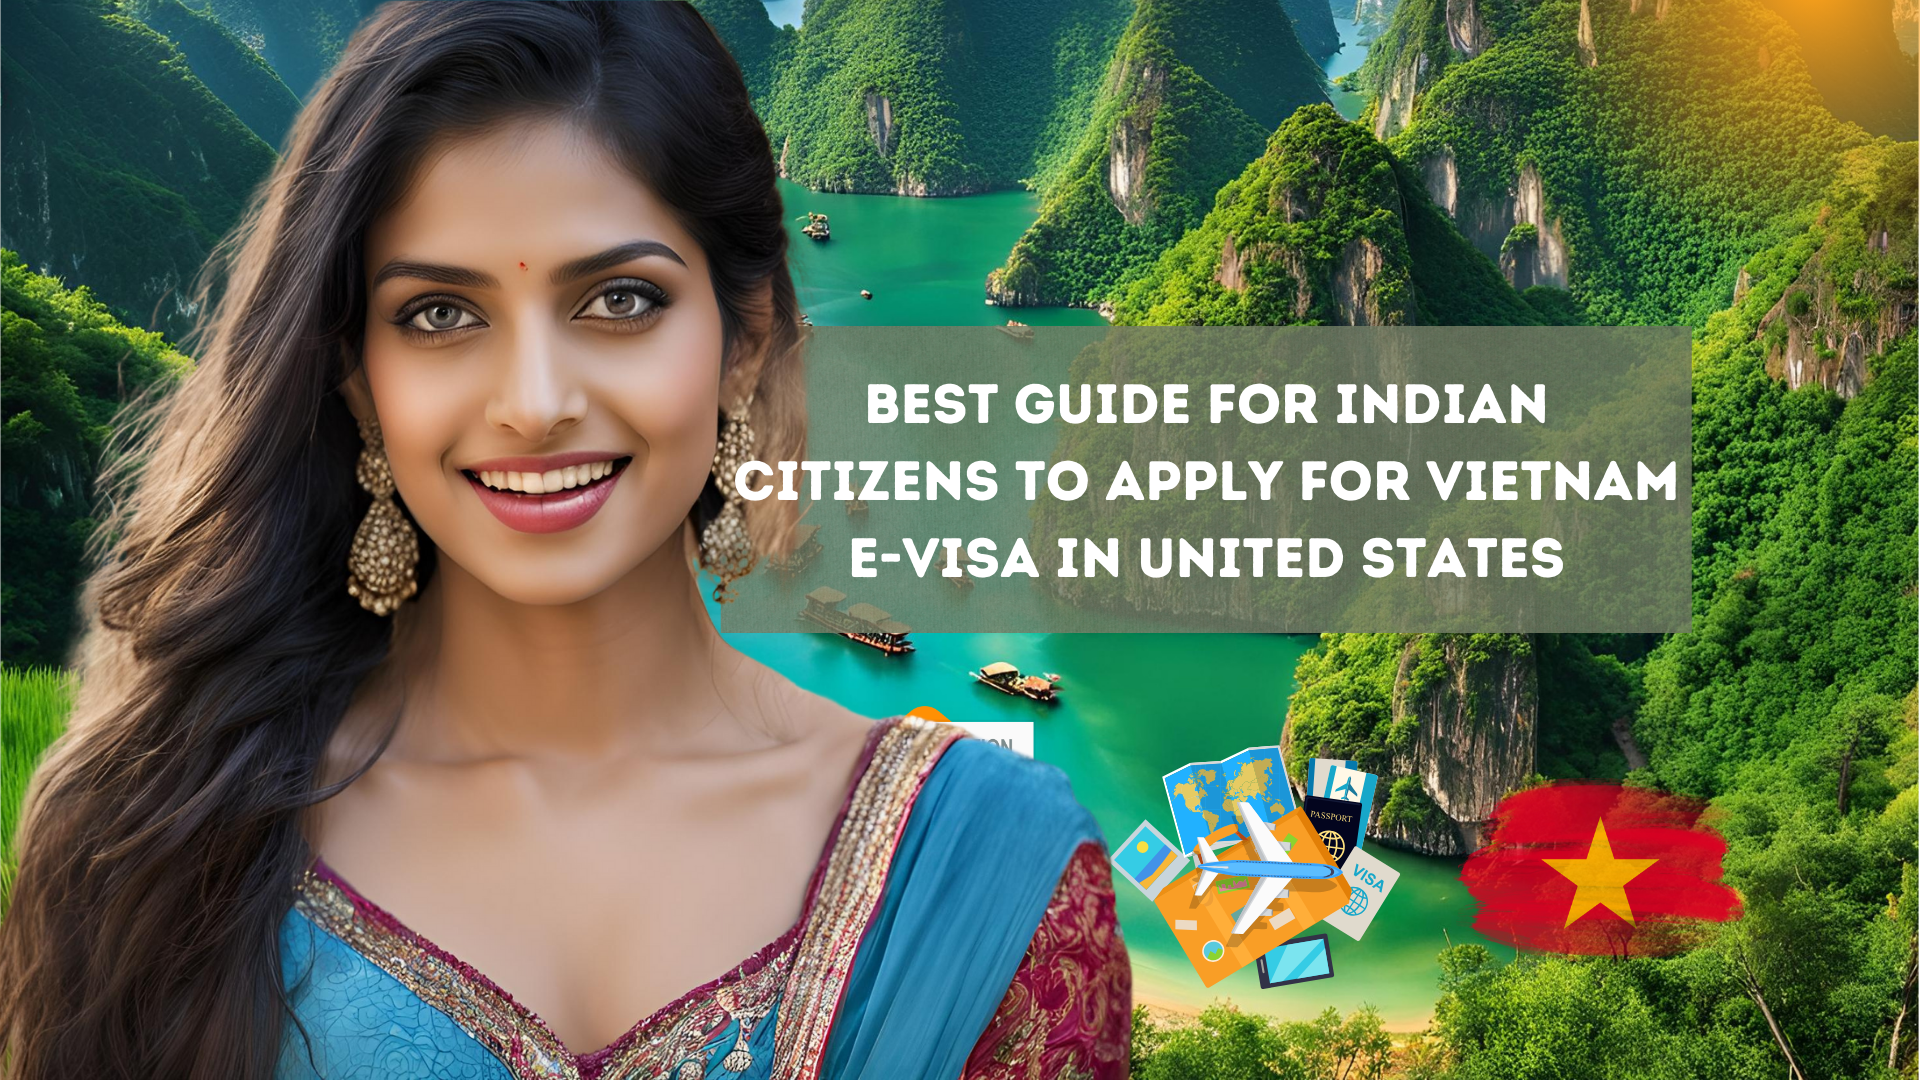 Best Guide for Indian Citizens to Apply for Vietnam E-Visa in United States